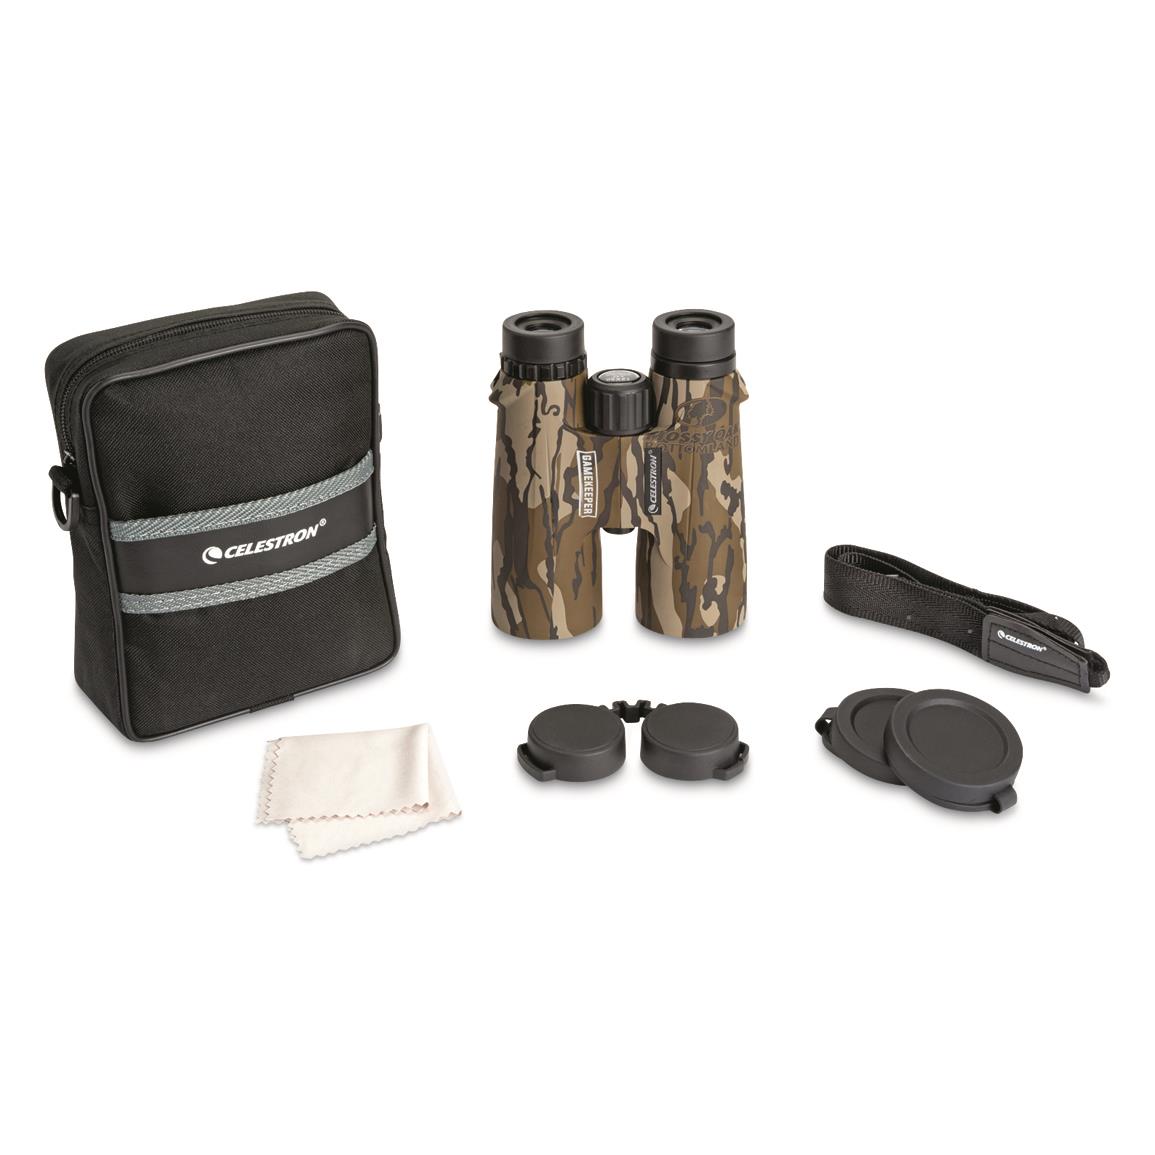 Celestron Gamekeeper 12x50 Roof Prism Binocular; Includes case, lens covers, strap, and cleaning cloth